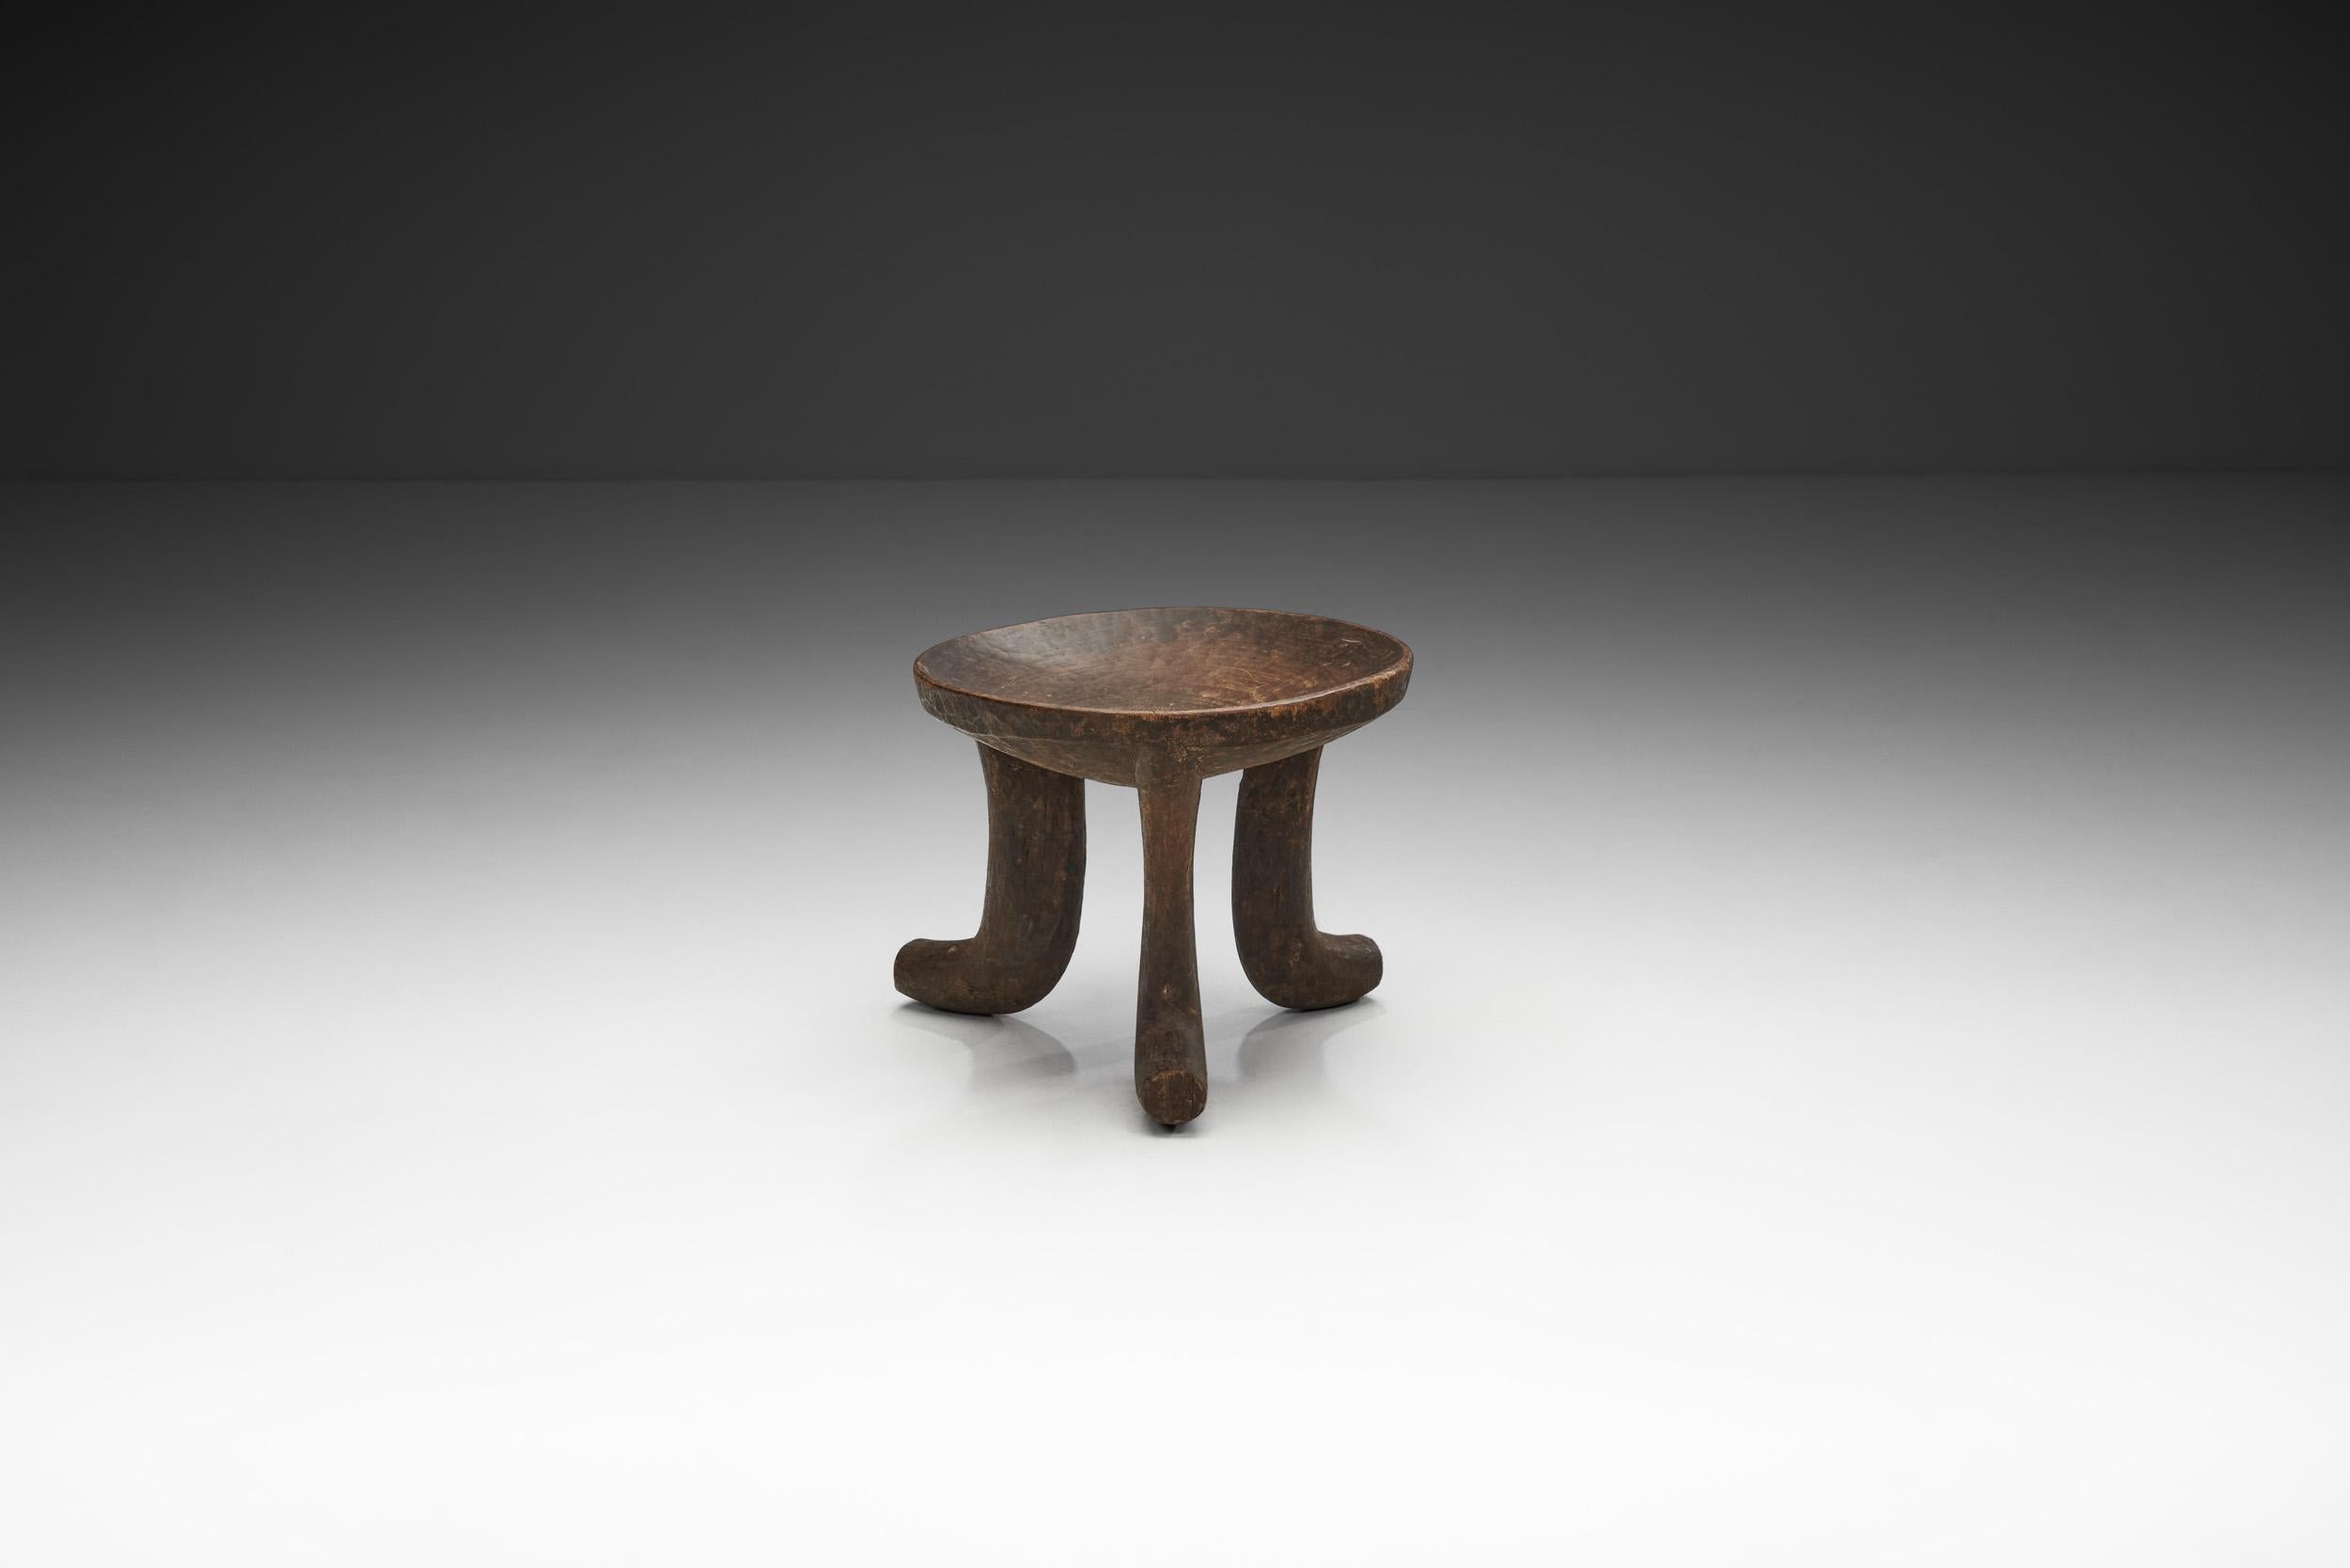 Ethiopian and other African-influenced furniture had been made from the 1850s, the most famous being Adolf Loos’s “Theban stool” designed around 1903 in the Egyptian revival style. Based on its visual qualities, this Ethiopian stool could have